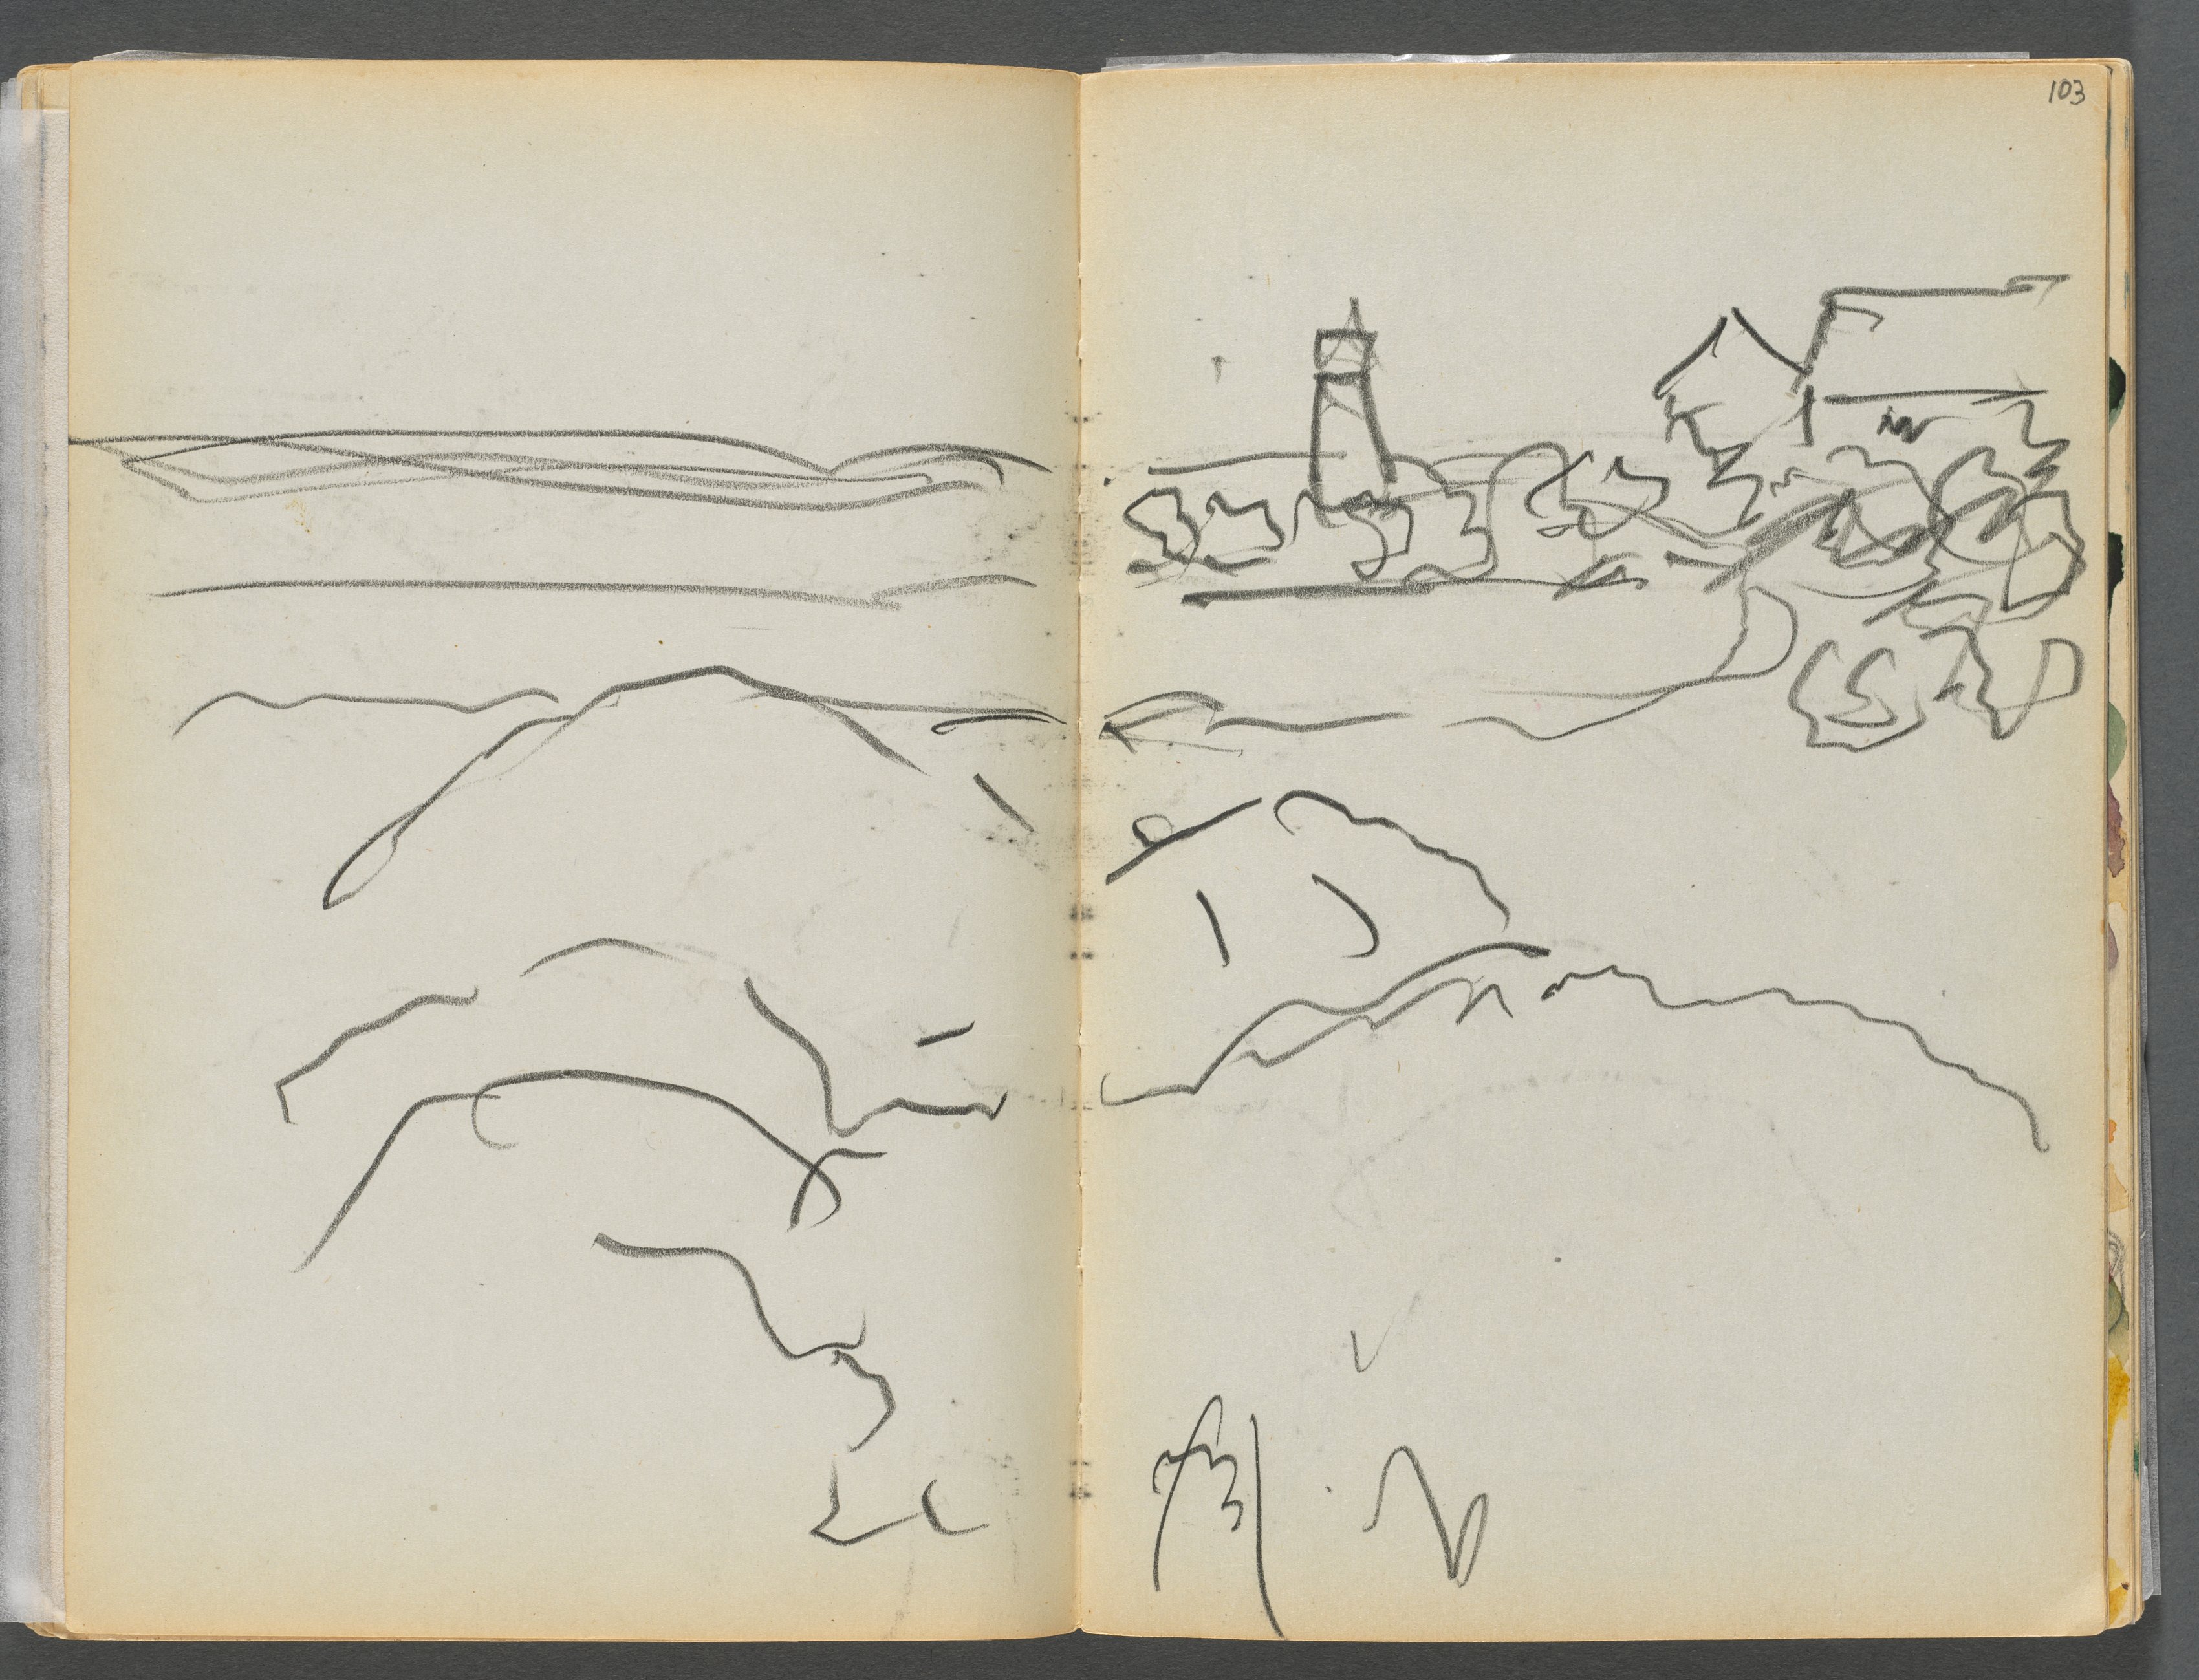 Sketchbook- The Granite Shore Hotel, Rockport, page 102 & 103: Harbor View with Lighthouse 